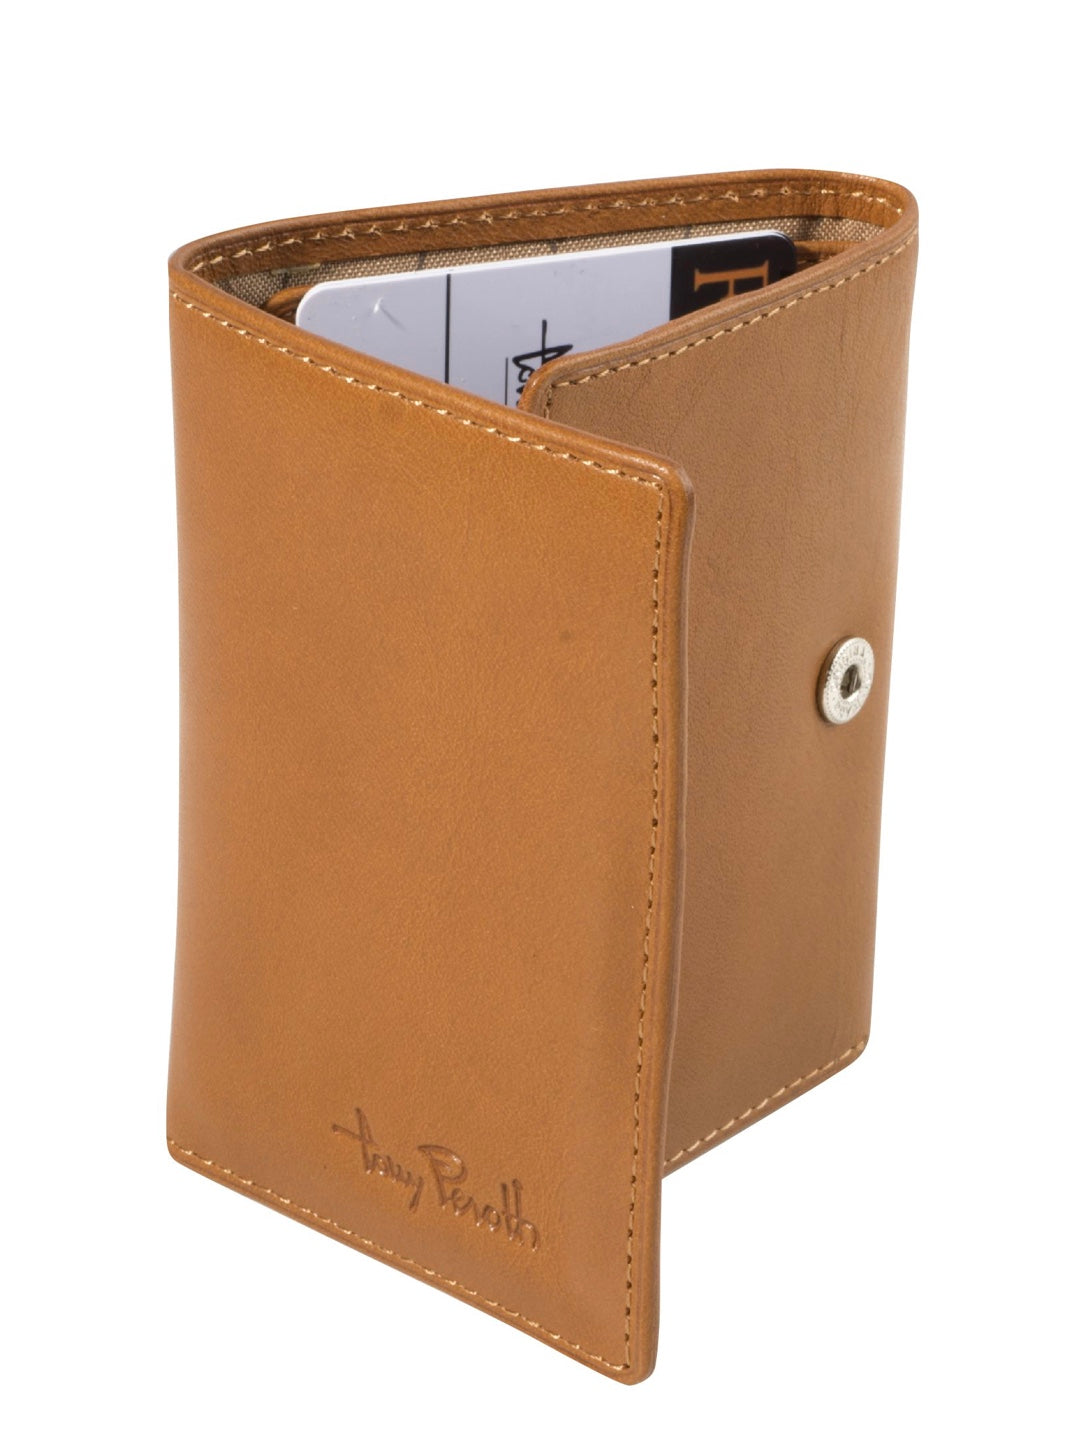 Leather Mini Wallet RFID Cardholder with change pocket *Special Price*